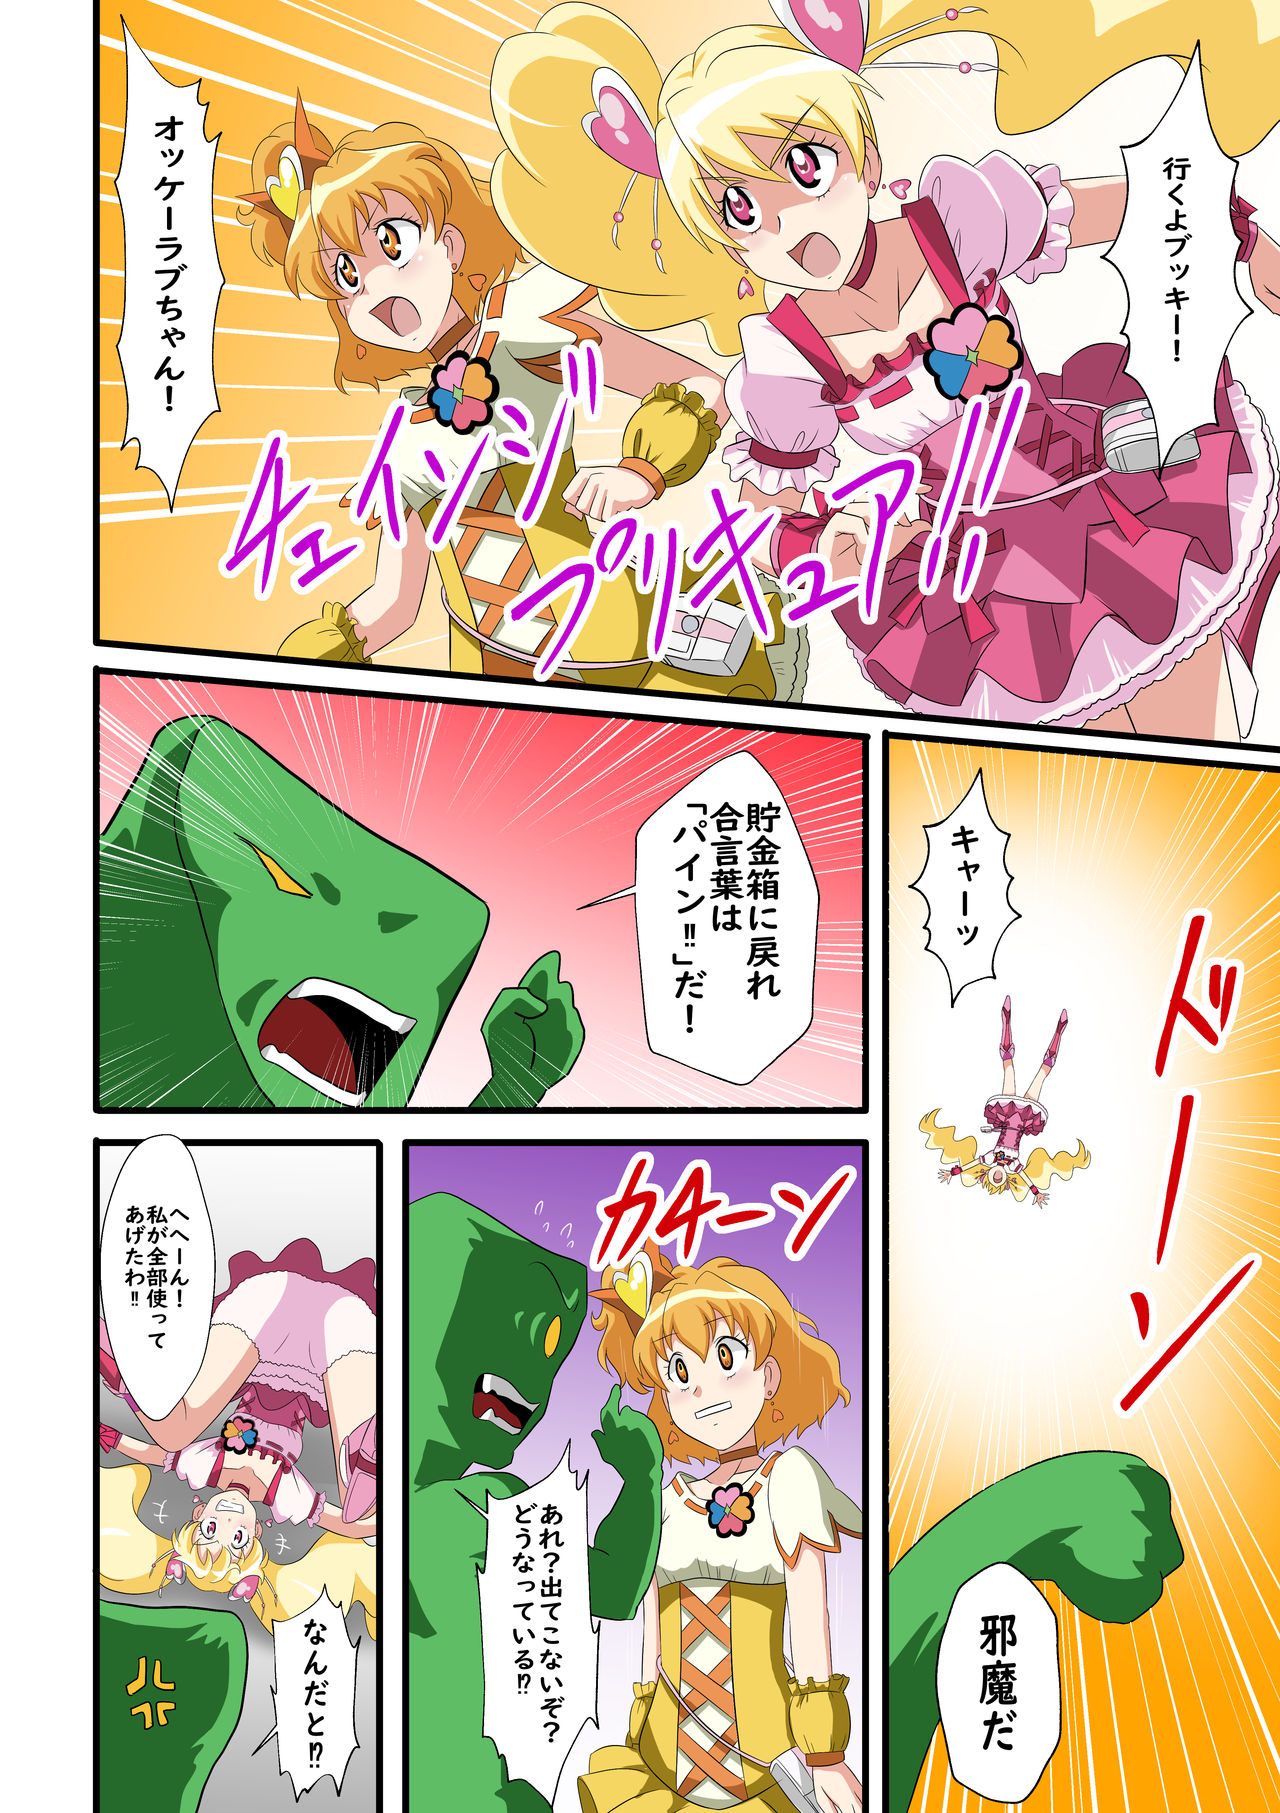 [Toki] Human piggy bank making machine Ⅱ ~Pure cure made into a piggy bank~ page 6 full